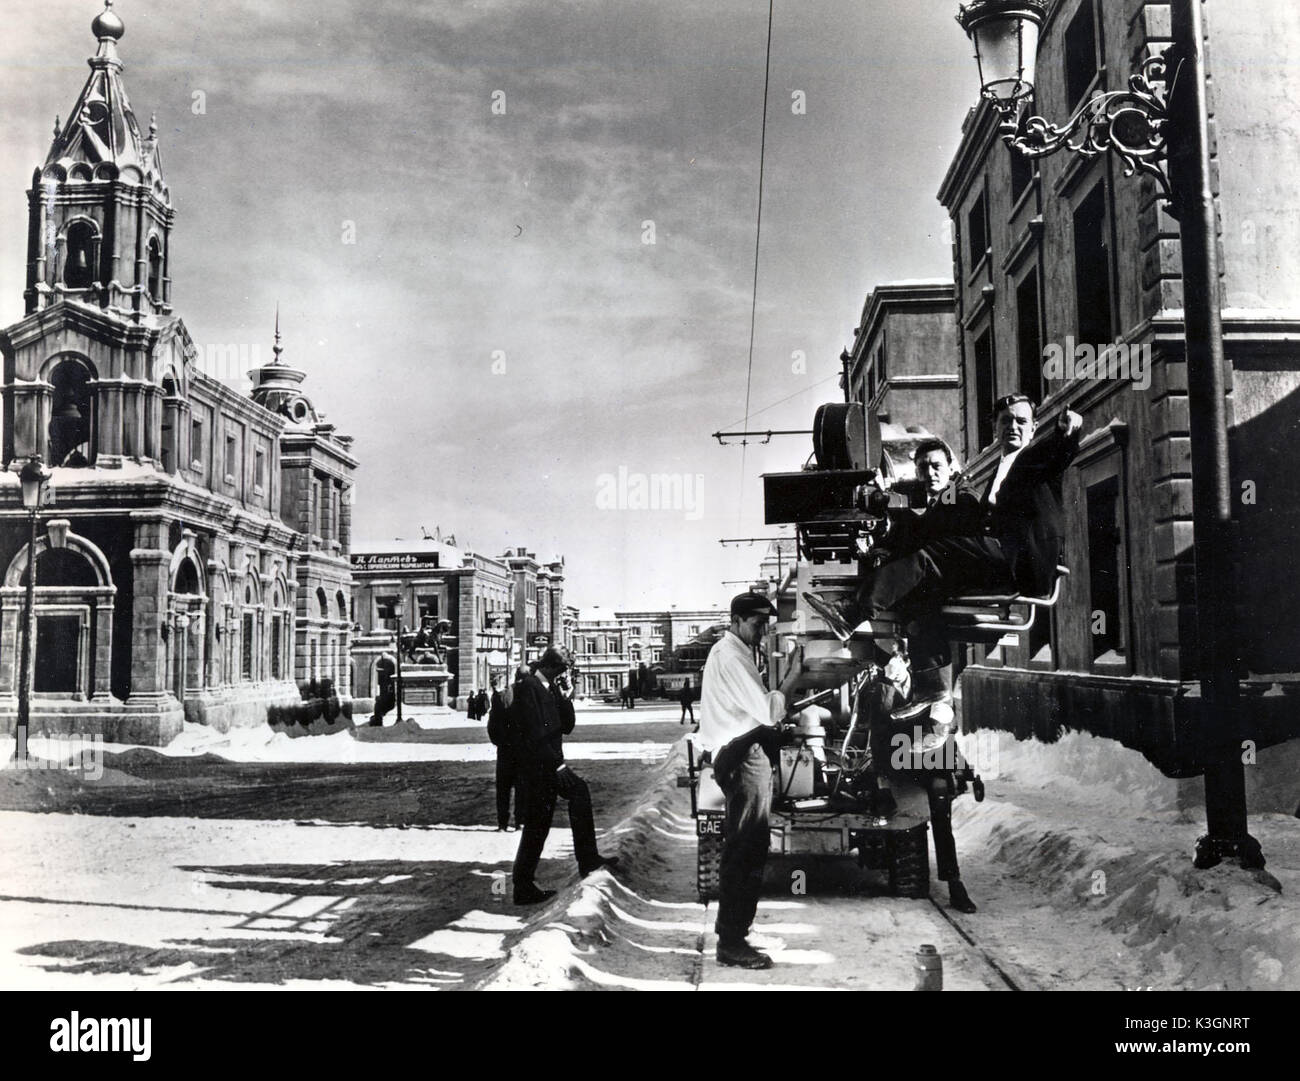 DOCTOR ZHIVAGO Director DAVID LEAN on a mobile camera boom with cinematographer FREDDIE FRANCIS     Date: 1965 Stock Photo